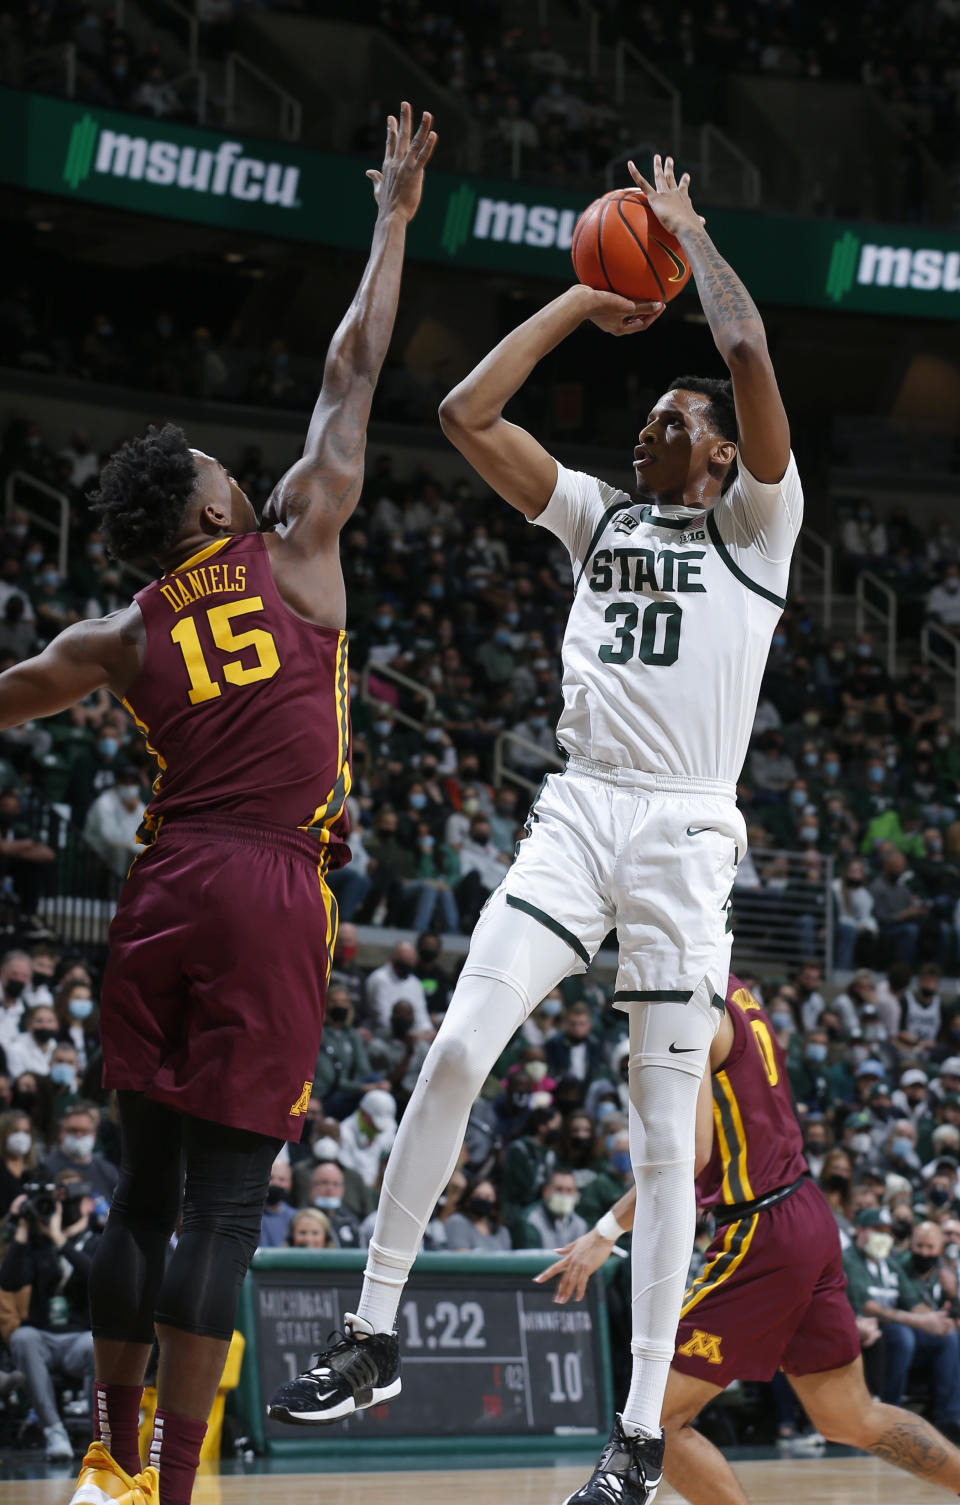 Michigan State's Marcus Bingham Jr., right, shoots over Minnesota's Charlie Daniels during the first half of an NCAA college basketball game, Wednesday, Jan. 12, 2022, in East Lansing, Mich. (AP Photo/Al Goldis)